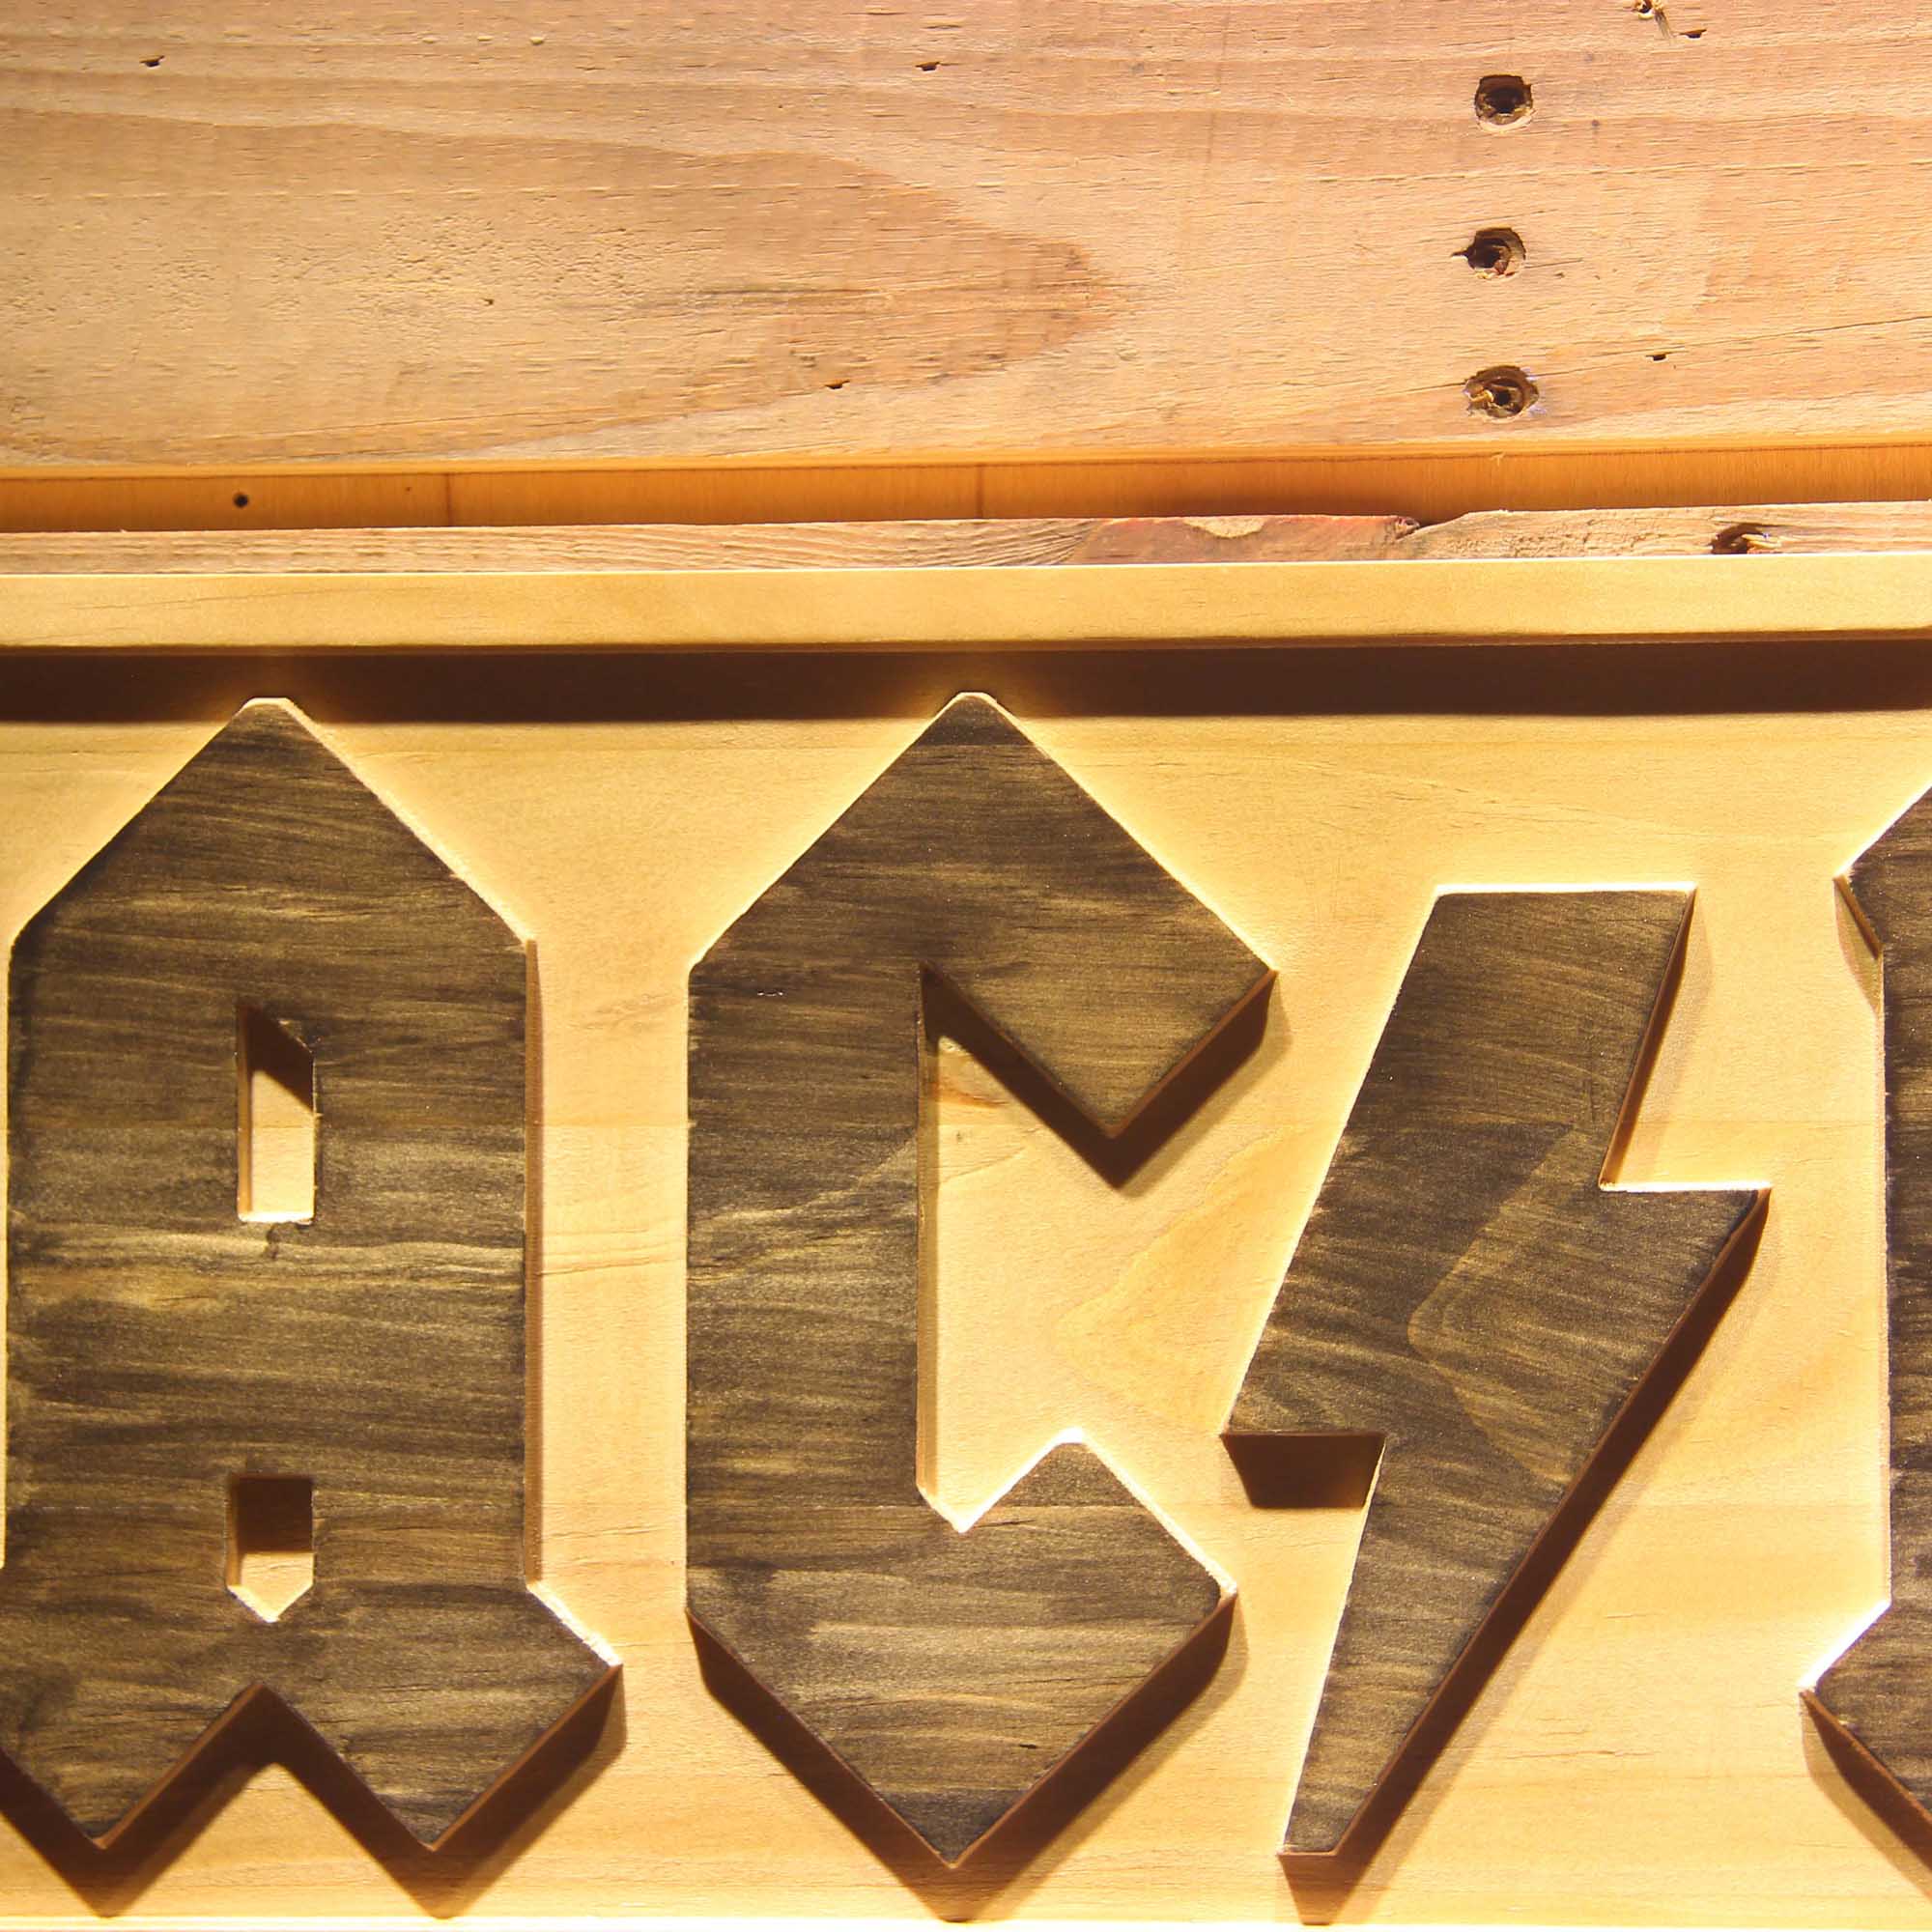 AC/DC Let There Be Rock 3D Wooden Engrave Sign